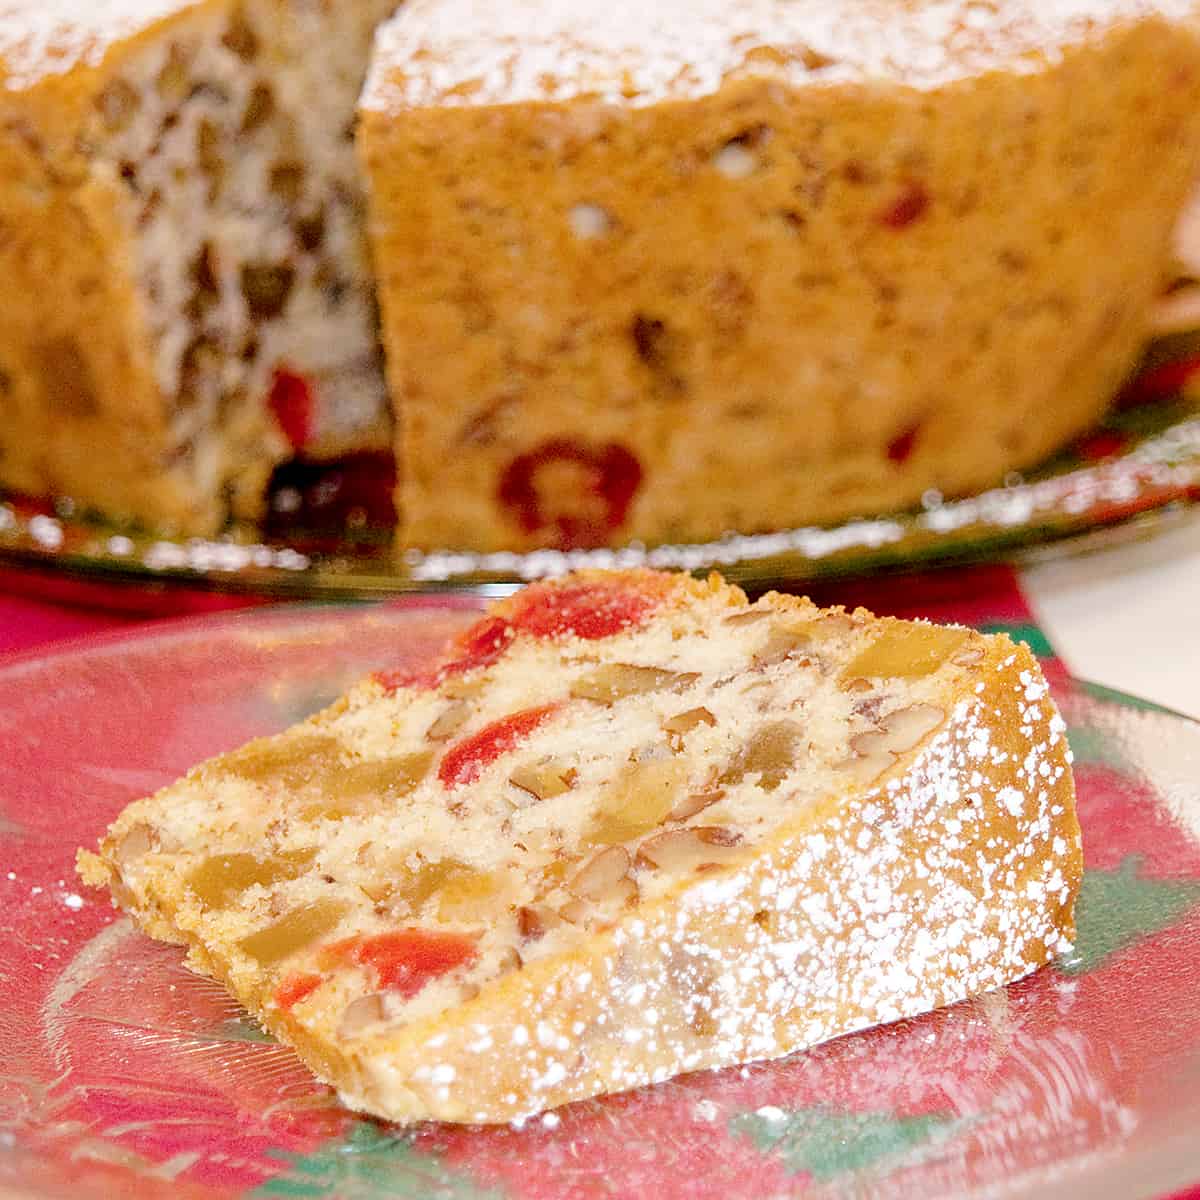 A slice of candied holiday fruitcake on a plate with remaining cake in background.